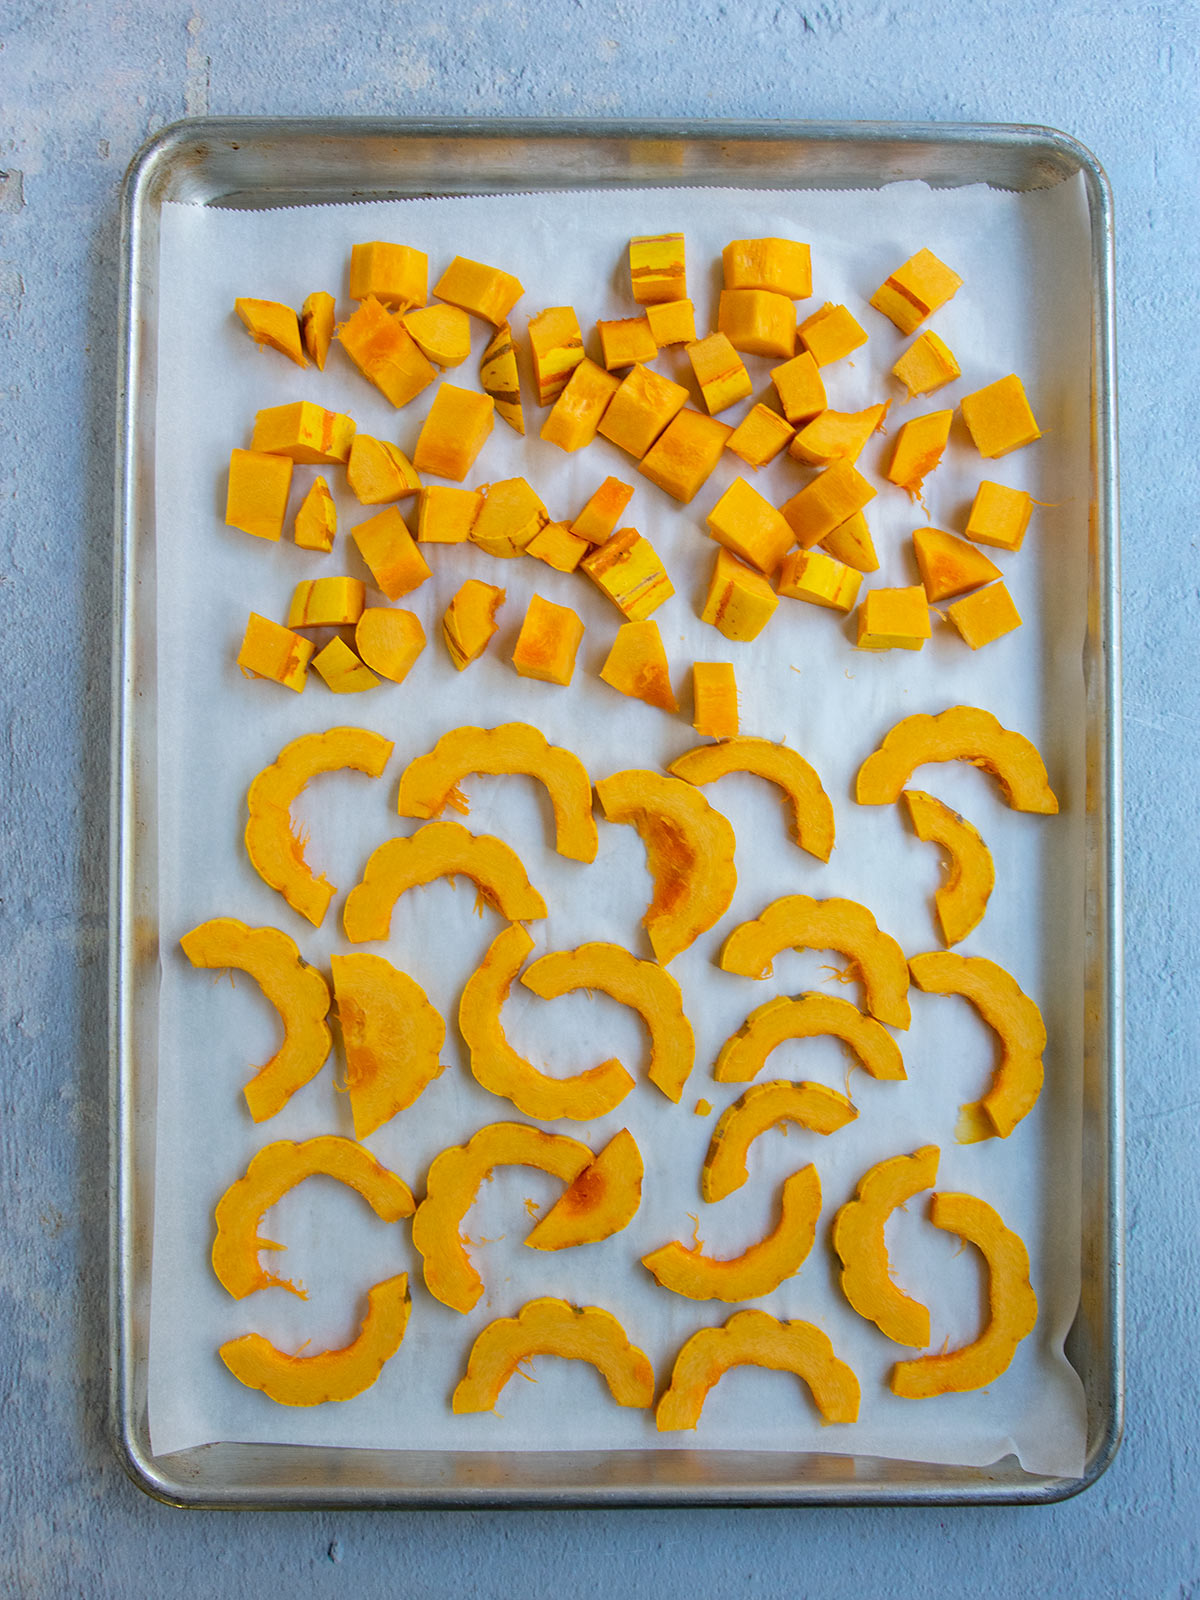 Cubed and half moon shaped squash on parchment lined sheet tray.